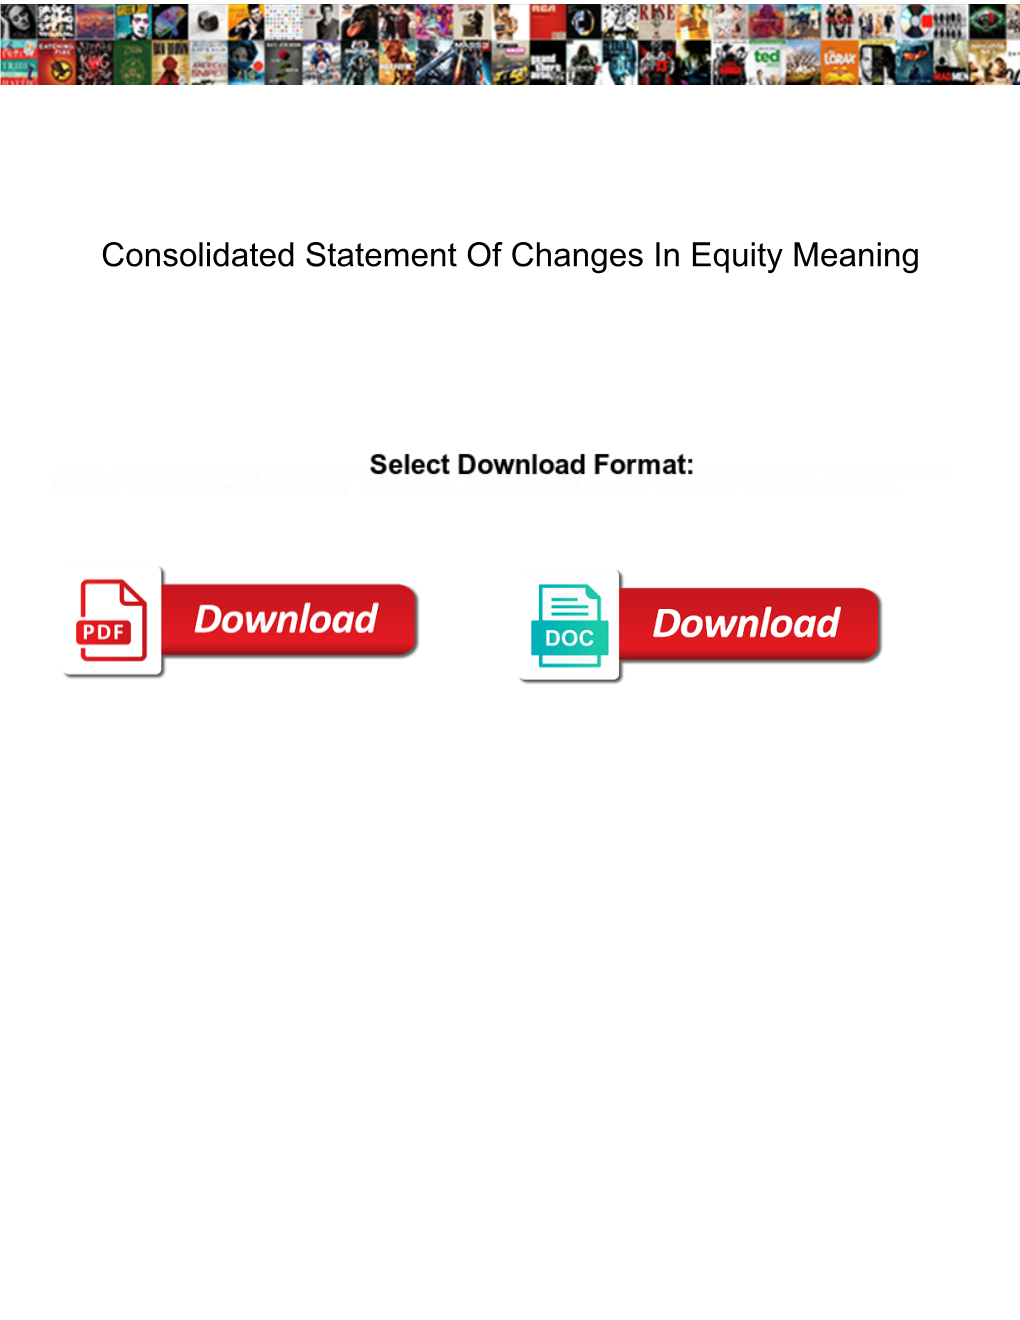 Consolidated Statement of Changes in Equity Meaning